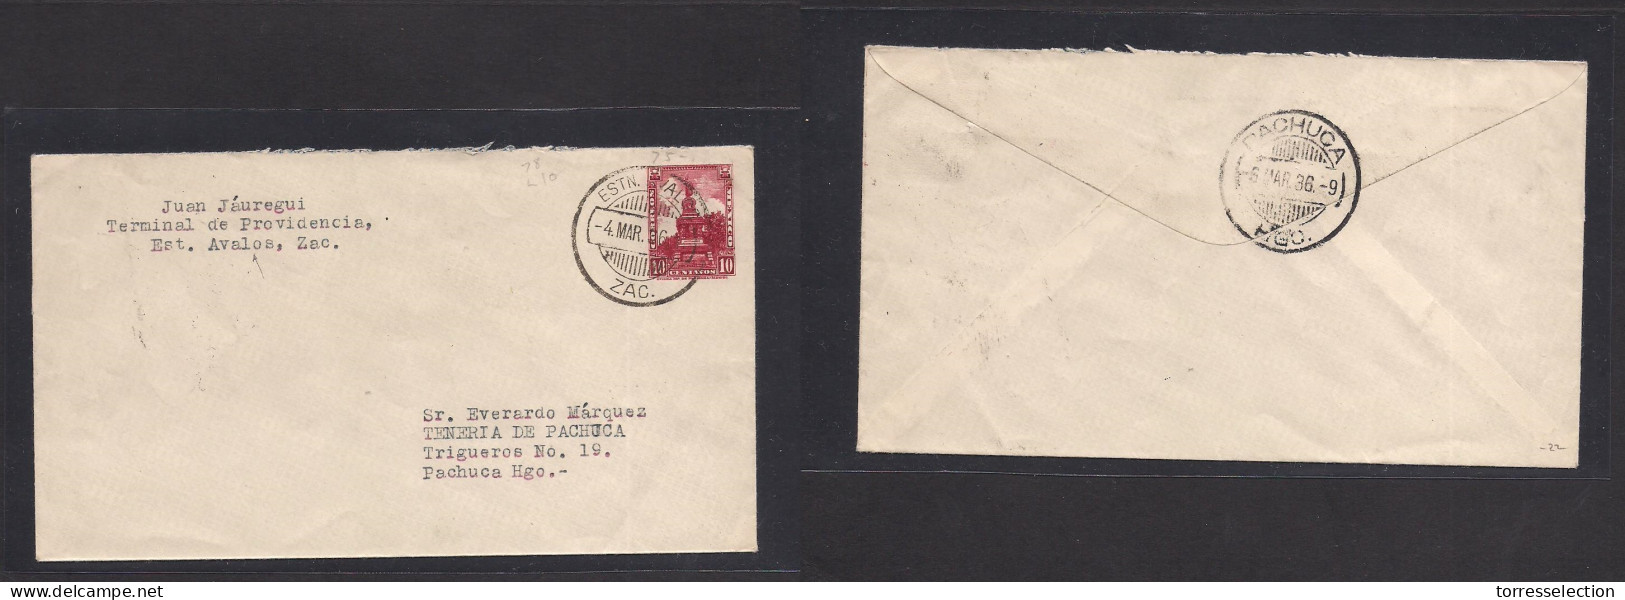 MEXICO - Stationery. 1936 (4 March) Est. Avalos, Zac - Pachuca 10c Red Stat Env. Fine Used. XSALE. - Mexique